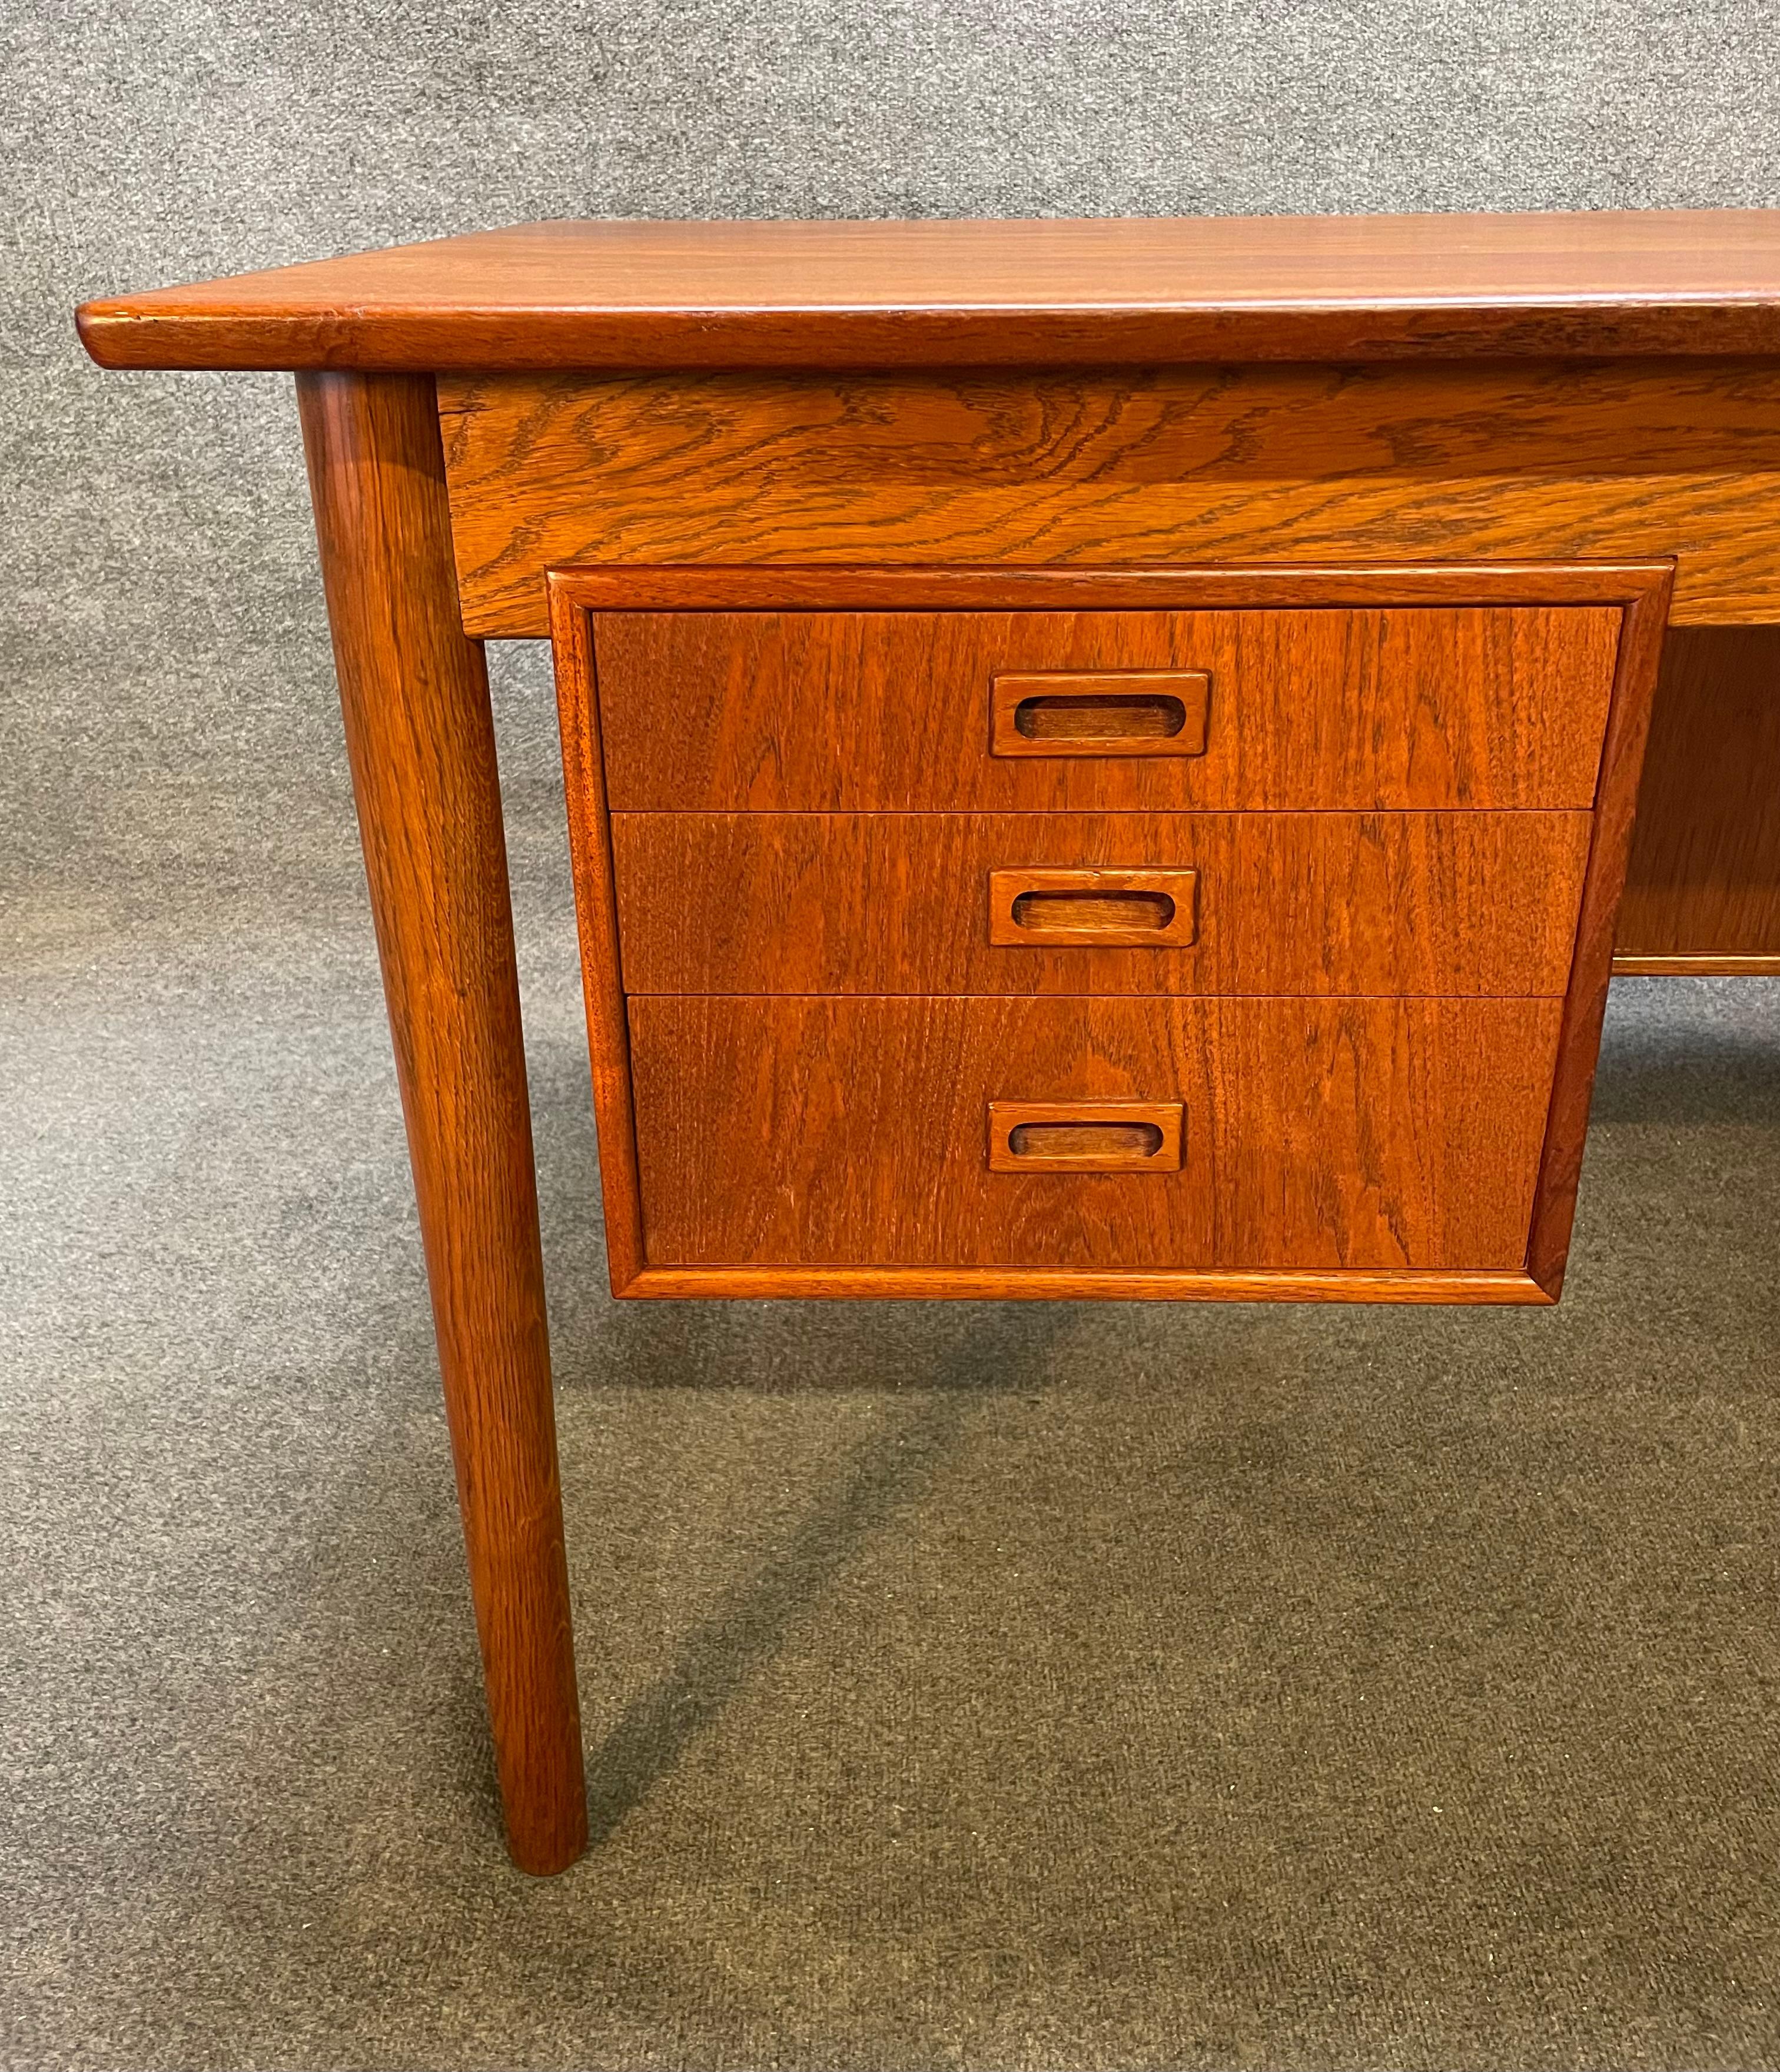 Here is a beautiful scandinavian modern desk in teak and oak woods designed by Borge Mogensen and manufactured by Søborg Møbelfabrik in Denmark in the 1950's.
This exclusive desk, recently imported from Europe to California before its refinishing,